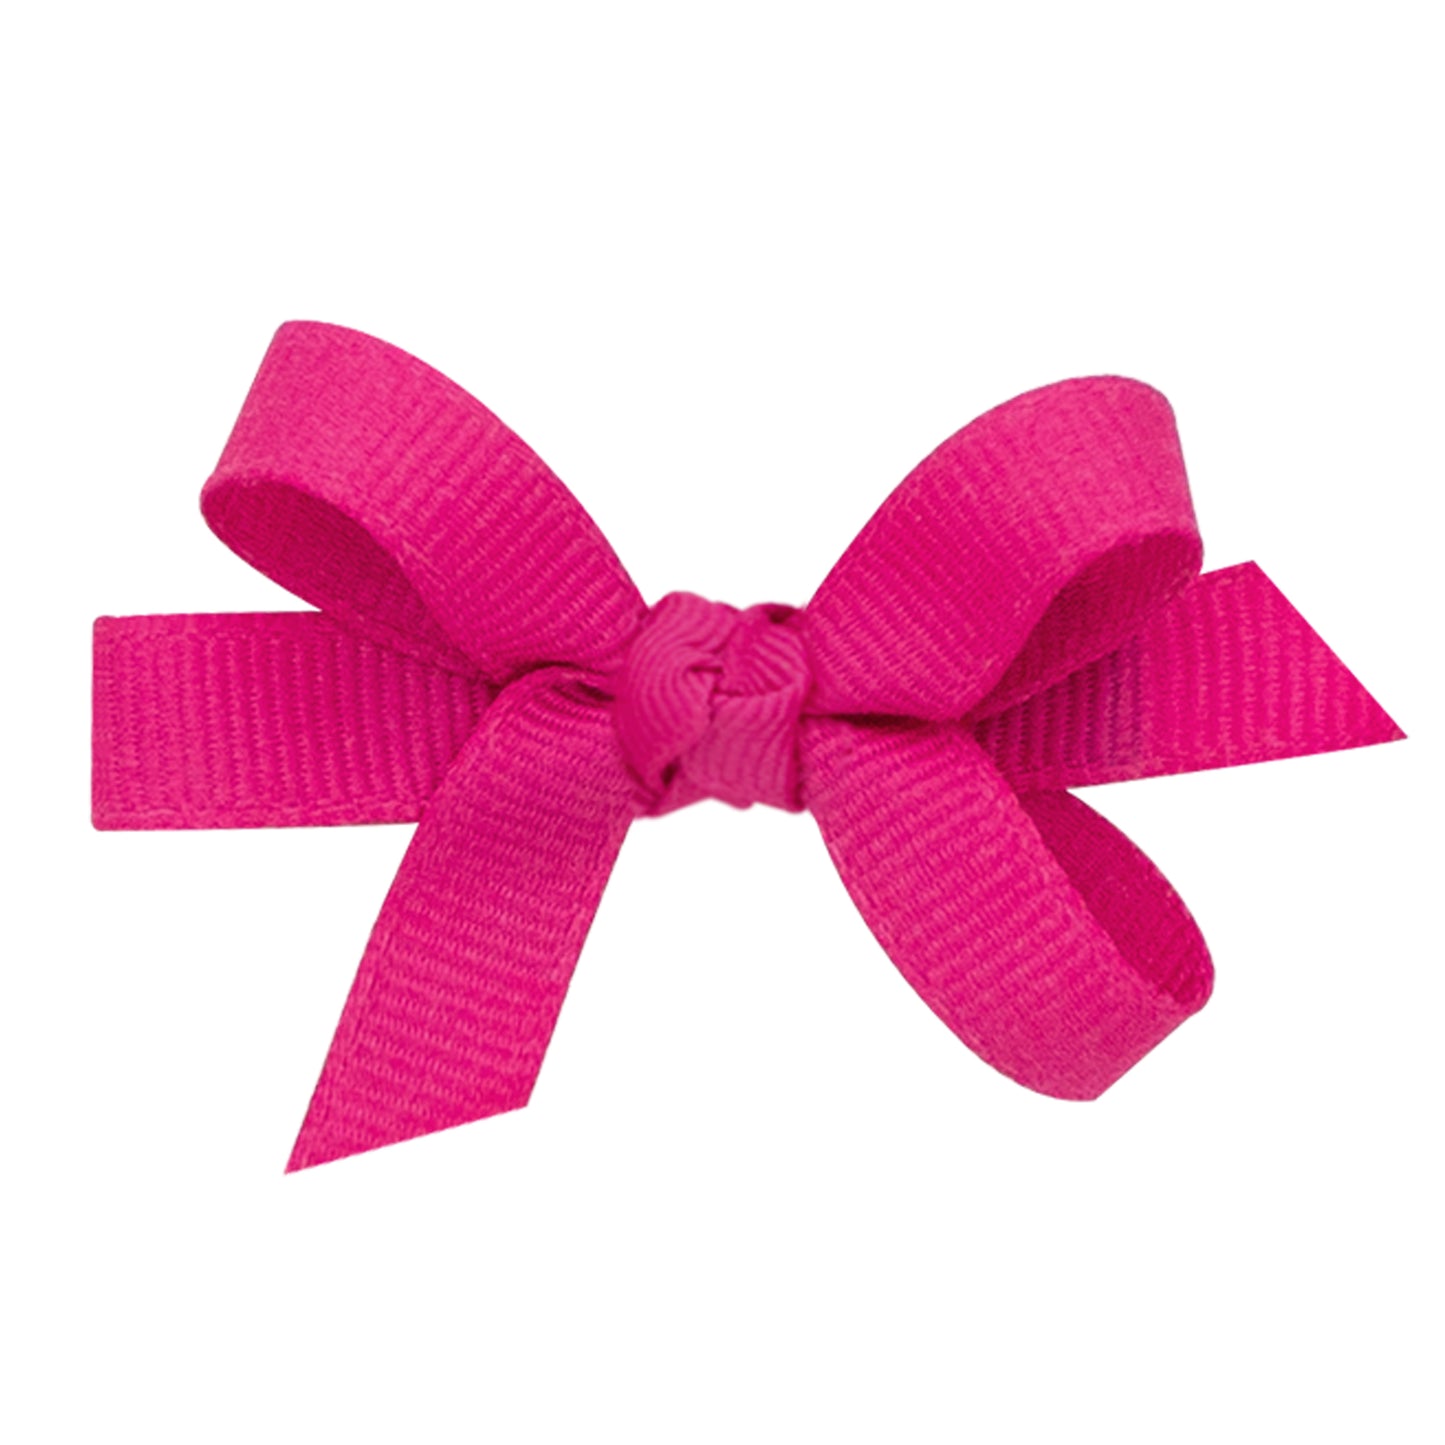 Sweet Baby Grosgrain Bow with Center Knot - Shocking Pink